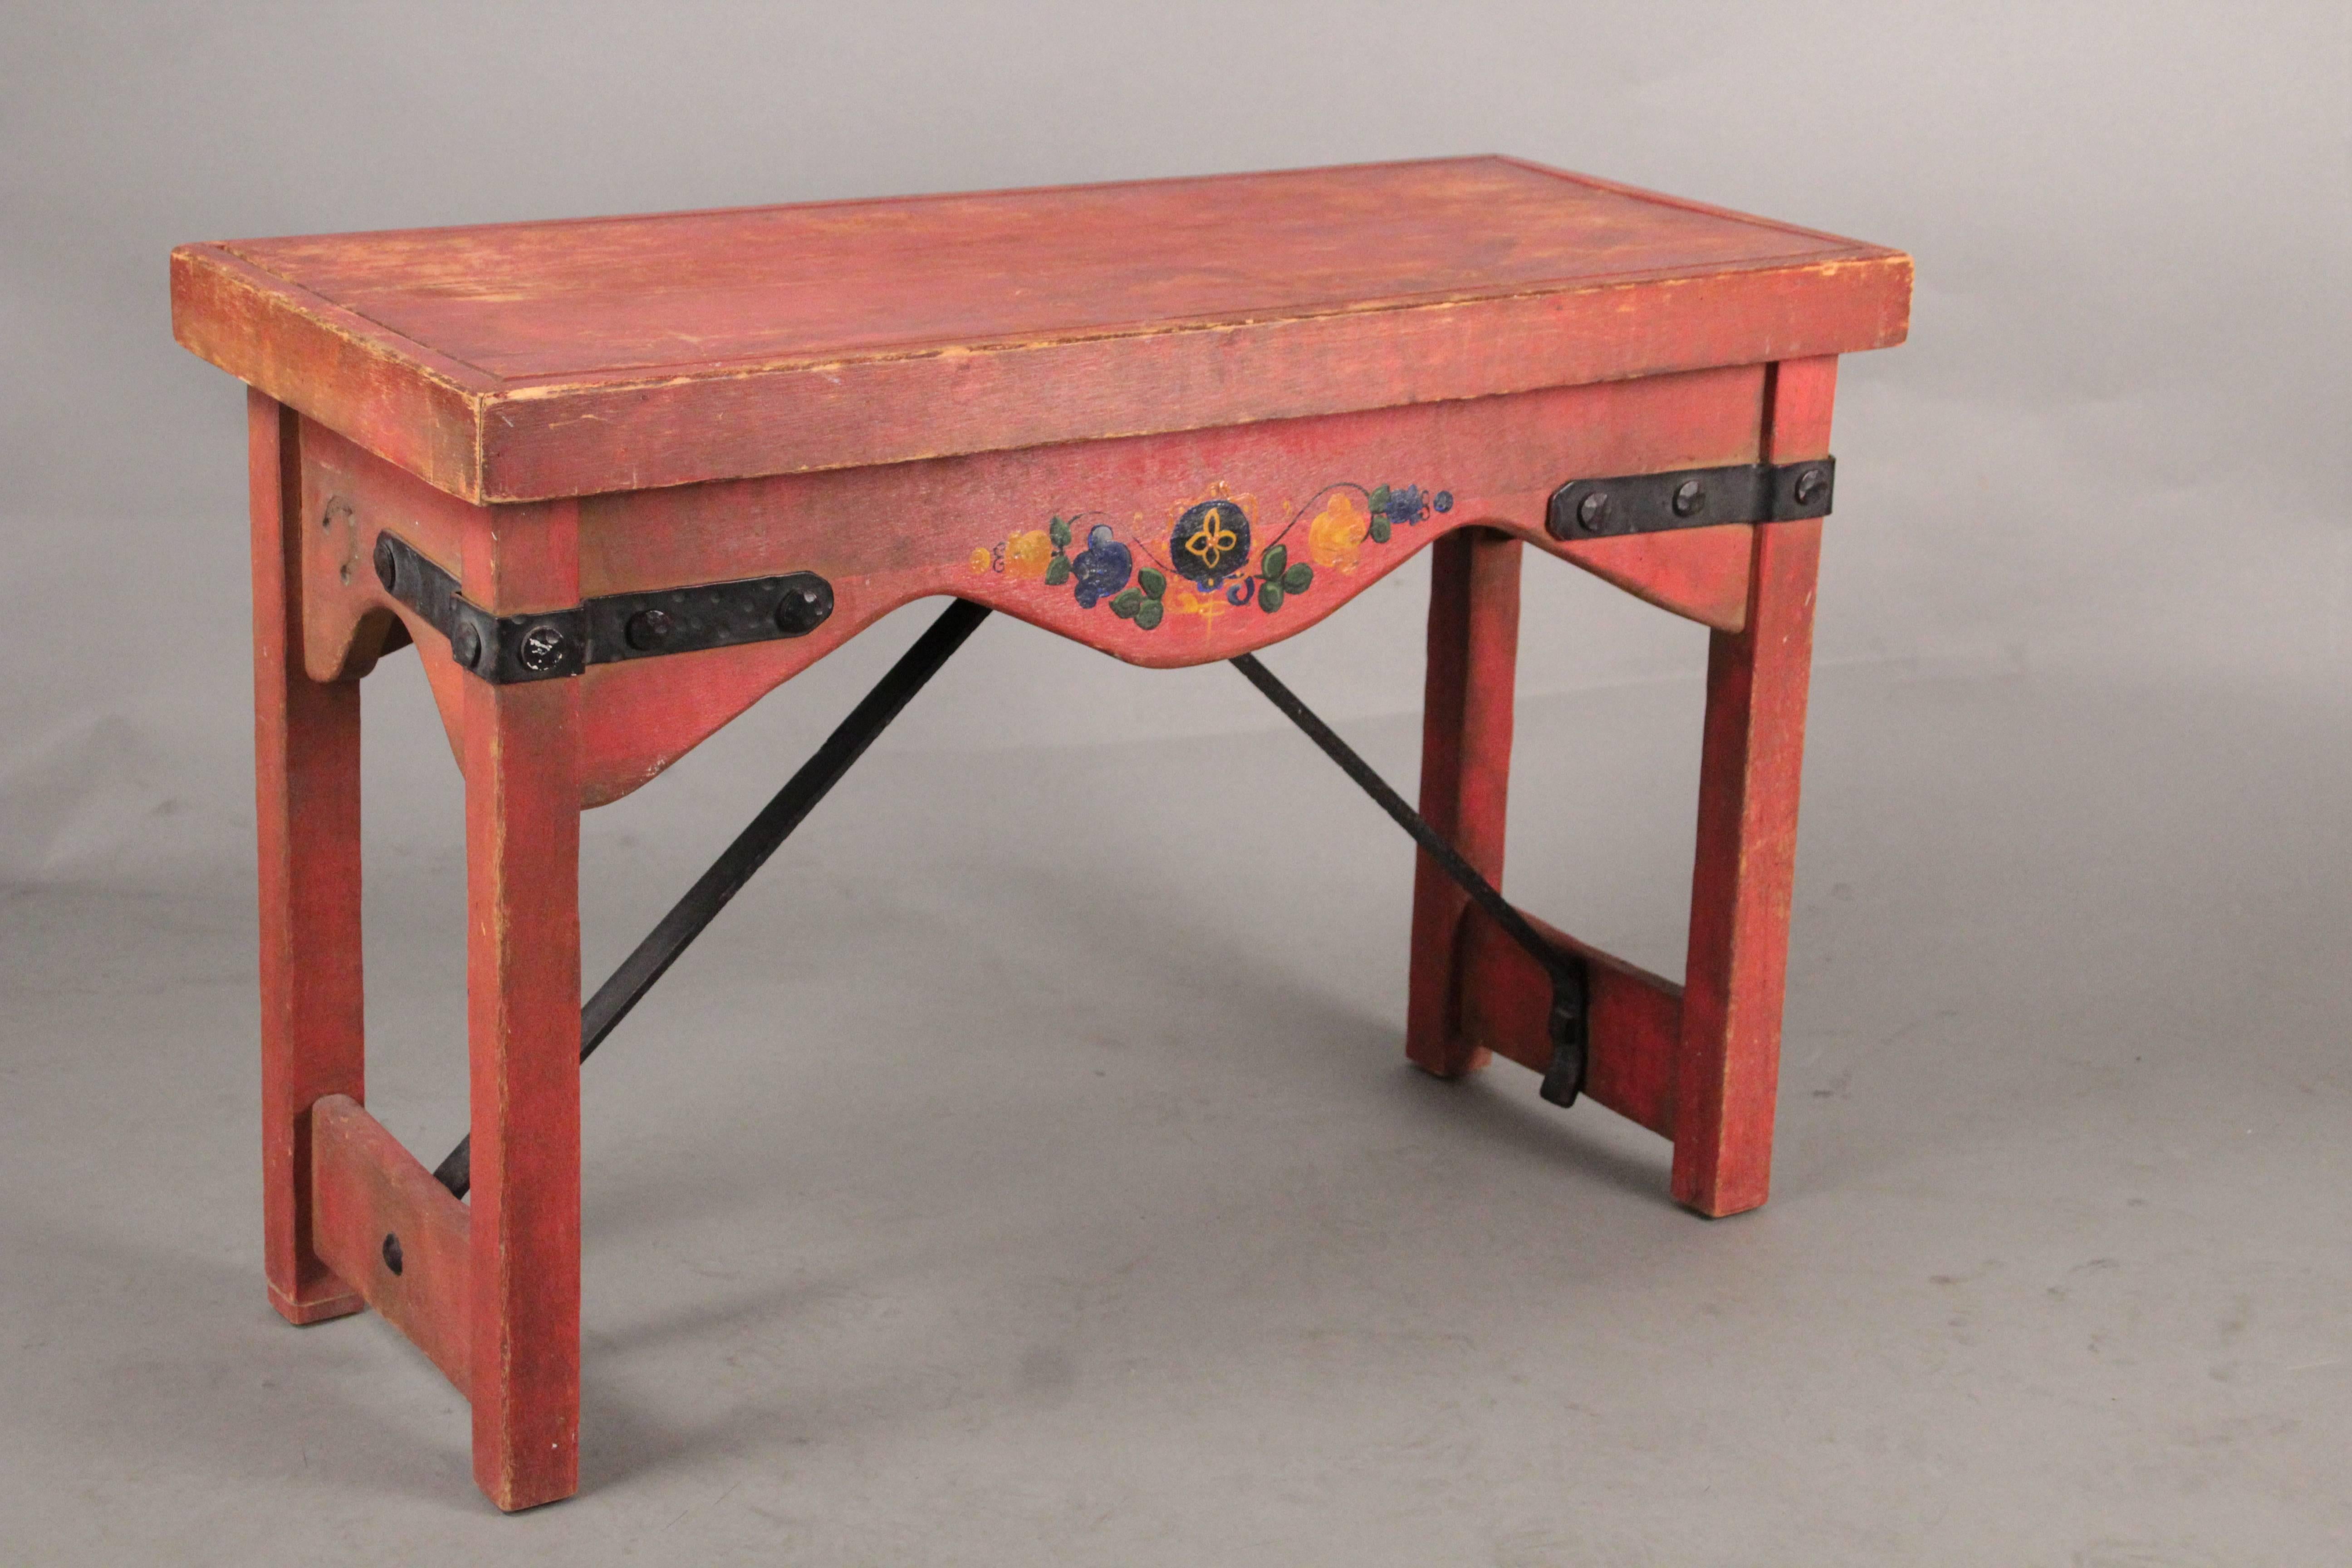 Old red California signed Monterey bench with iron stretcher and hand floral painting, circa 1930s. Original finish. Measures: 21.75